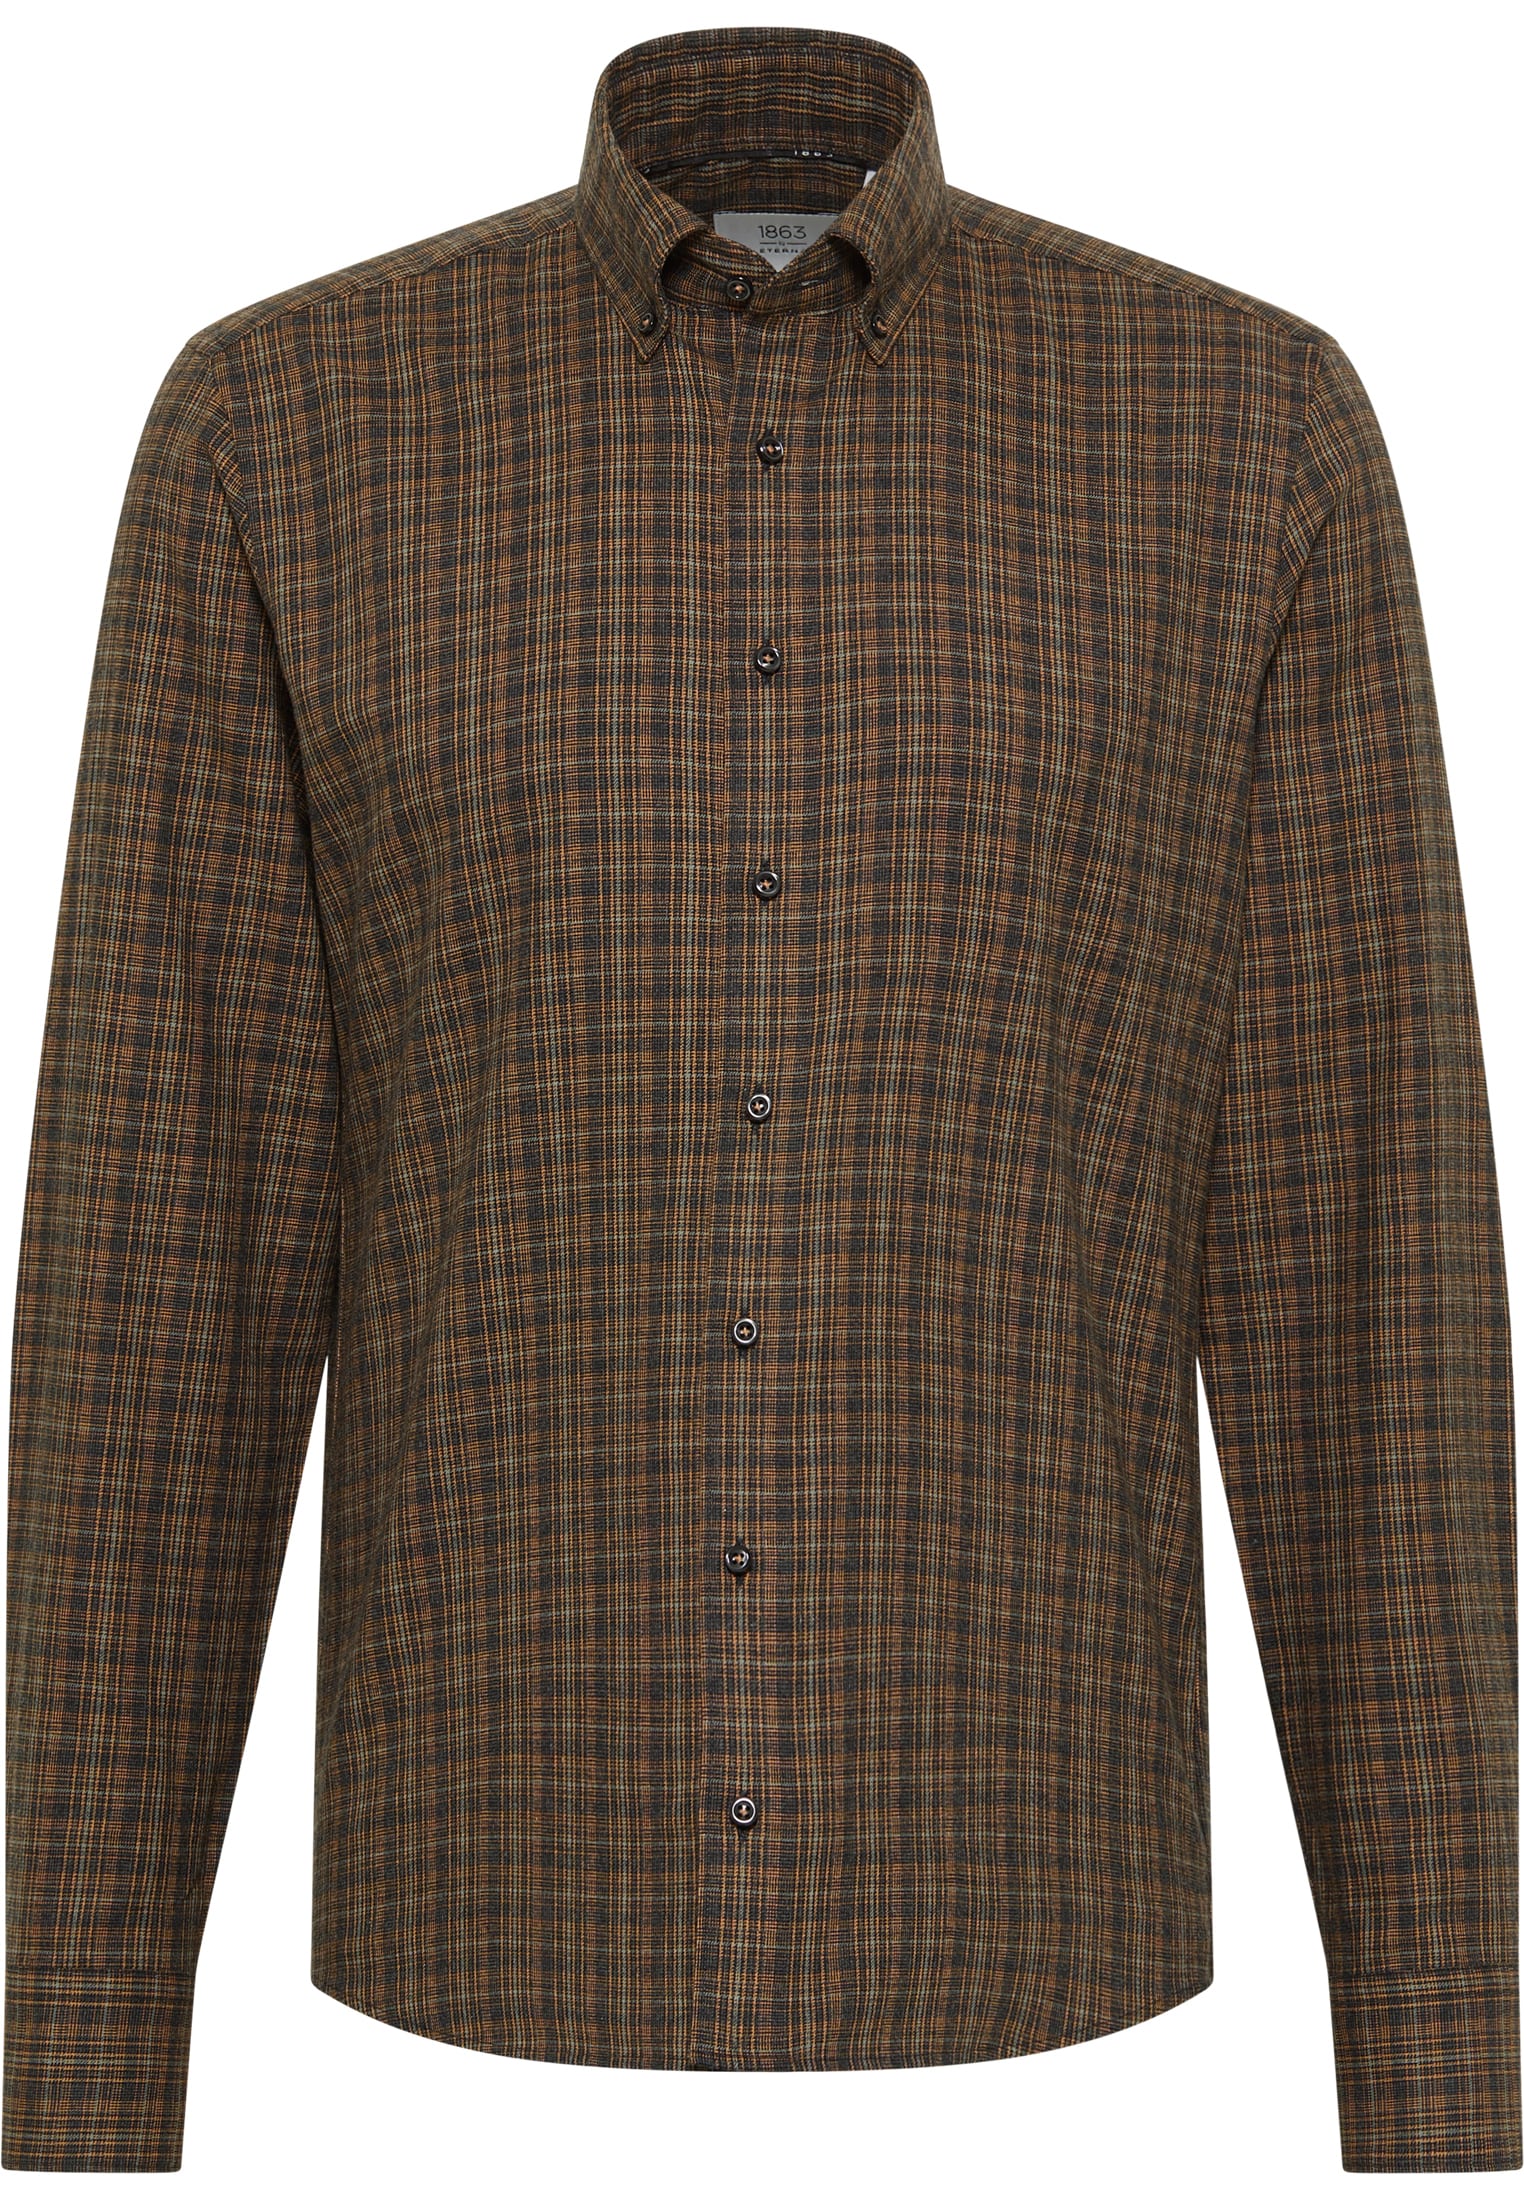 ETERNA checked Soft Tailoring shirt SLIM FIT